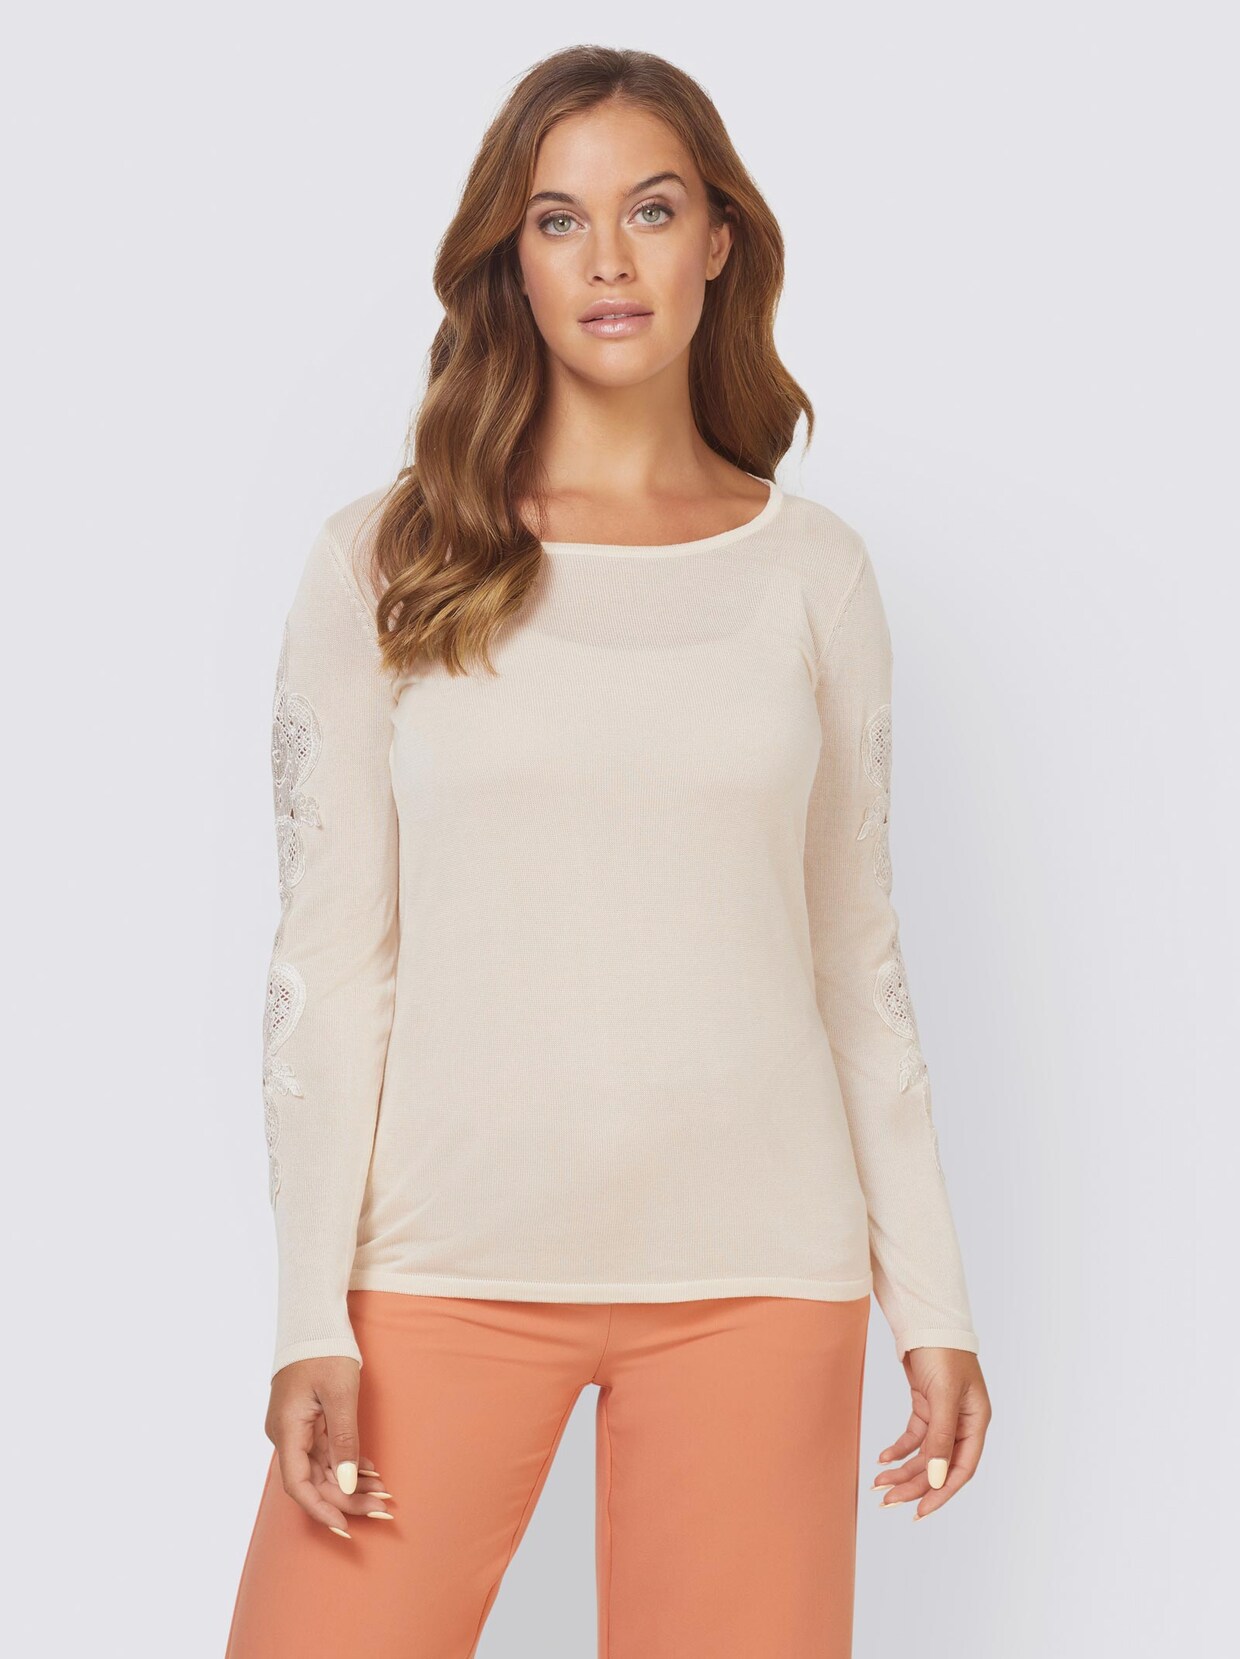 Ashley Brooke Pullover - champagne